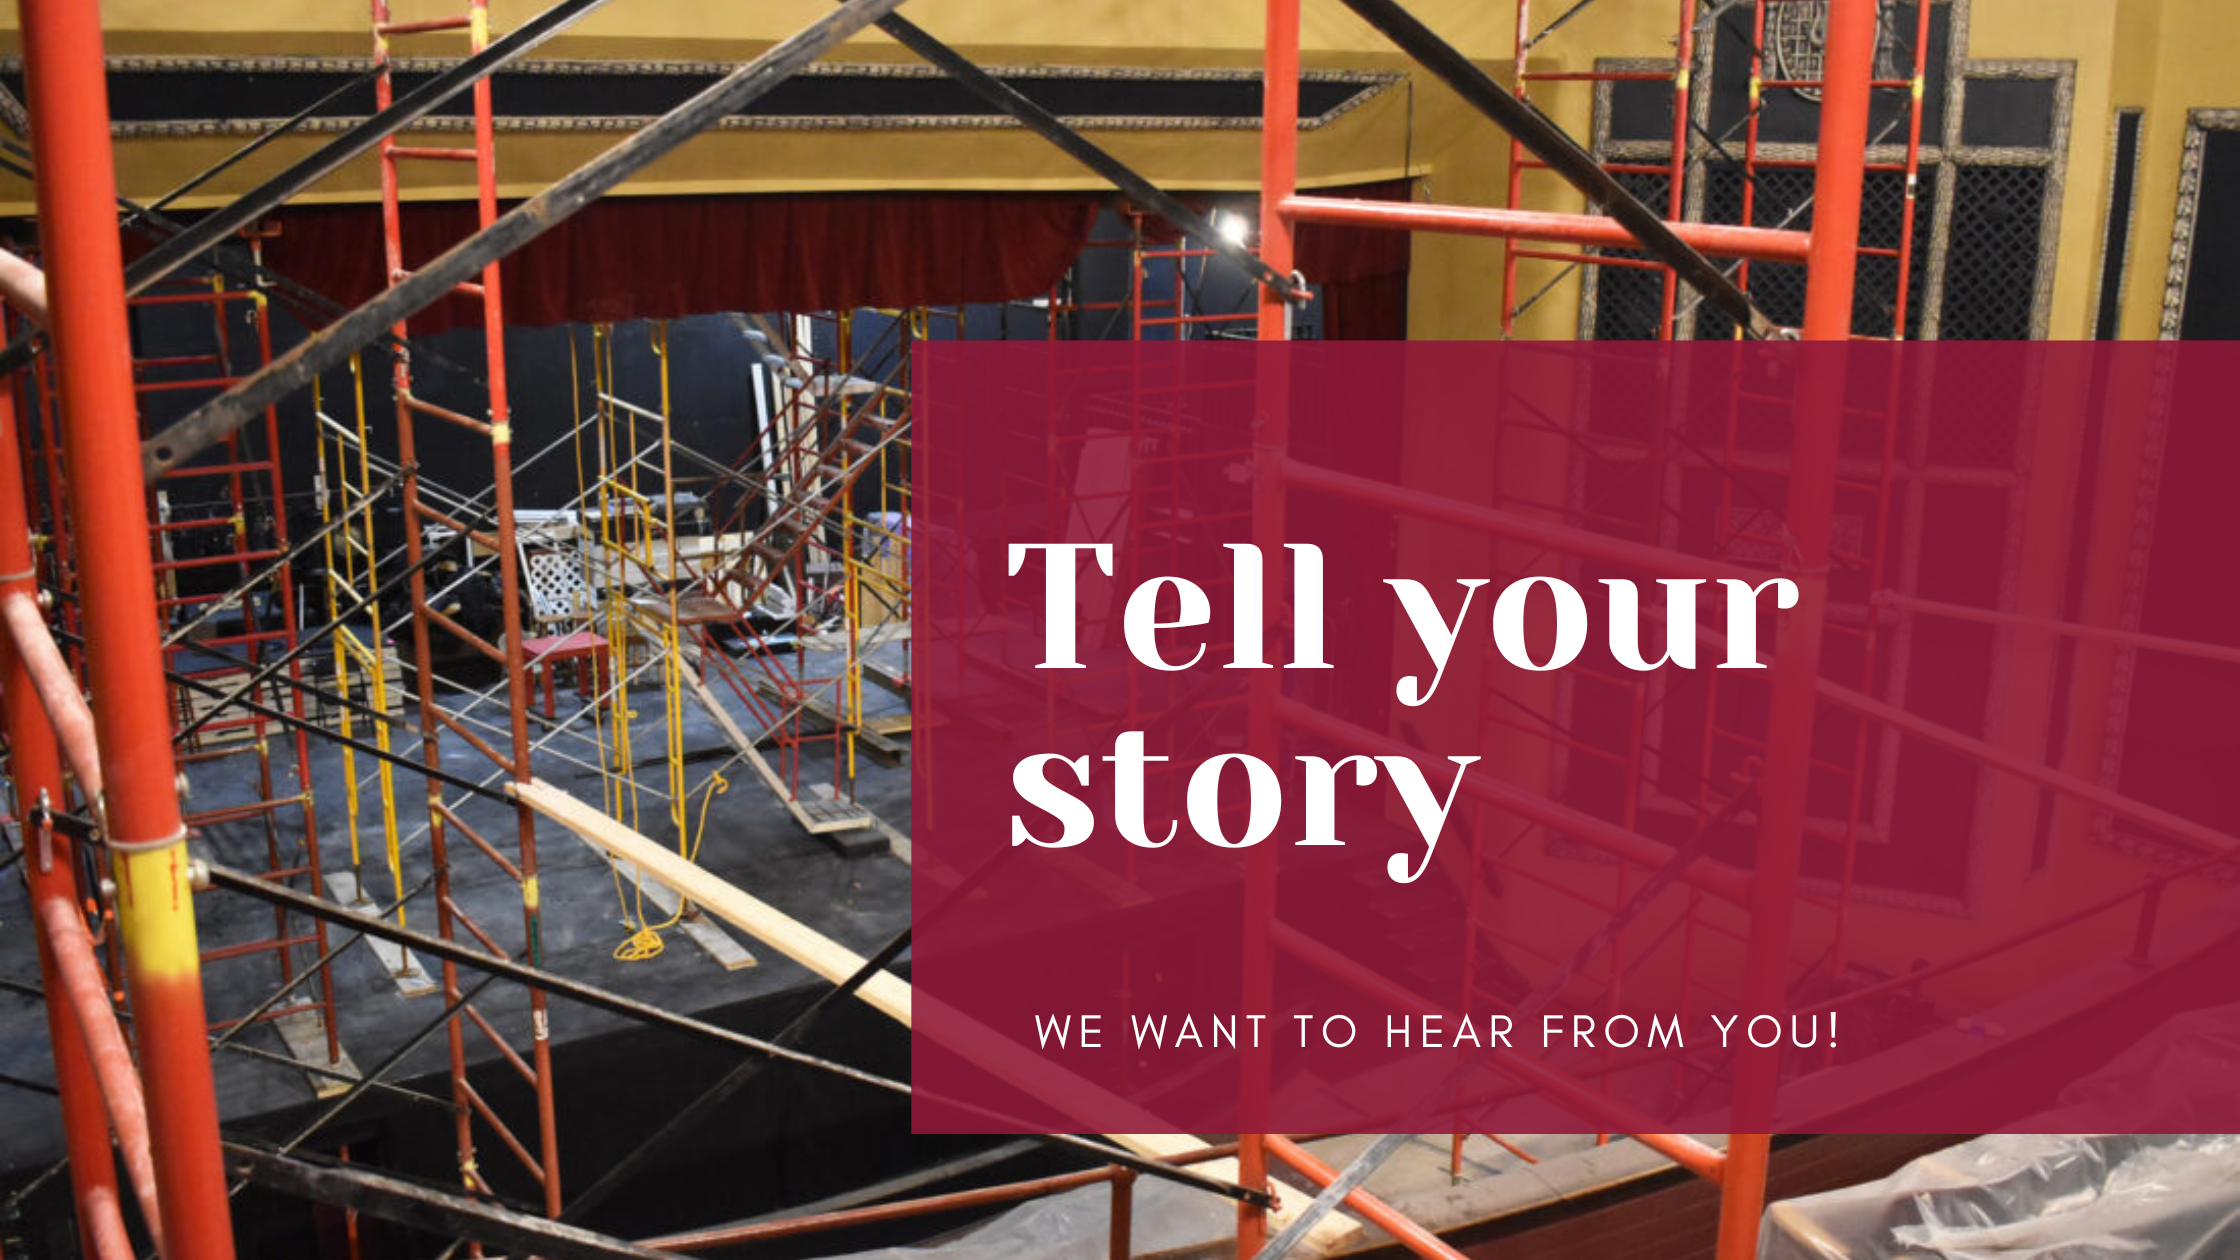 Tell your story - Fairmont Opera House